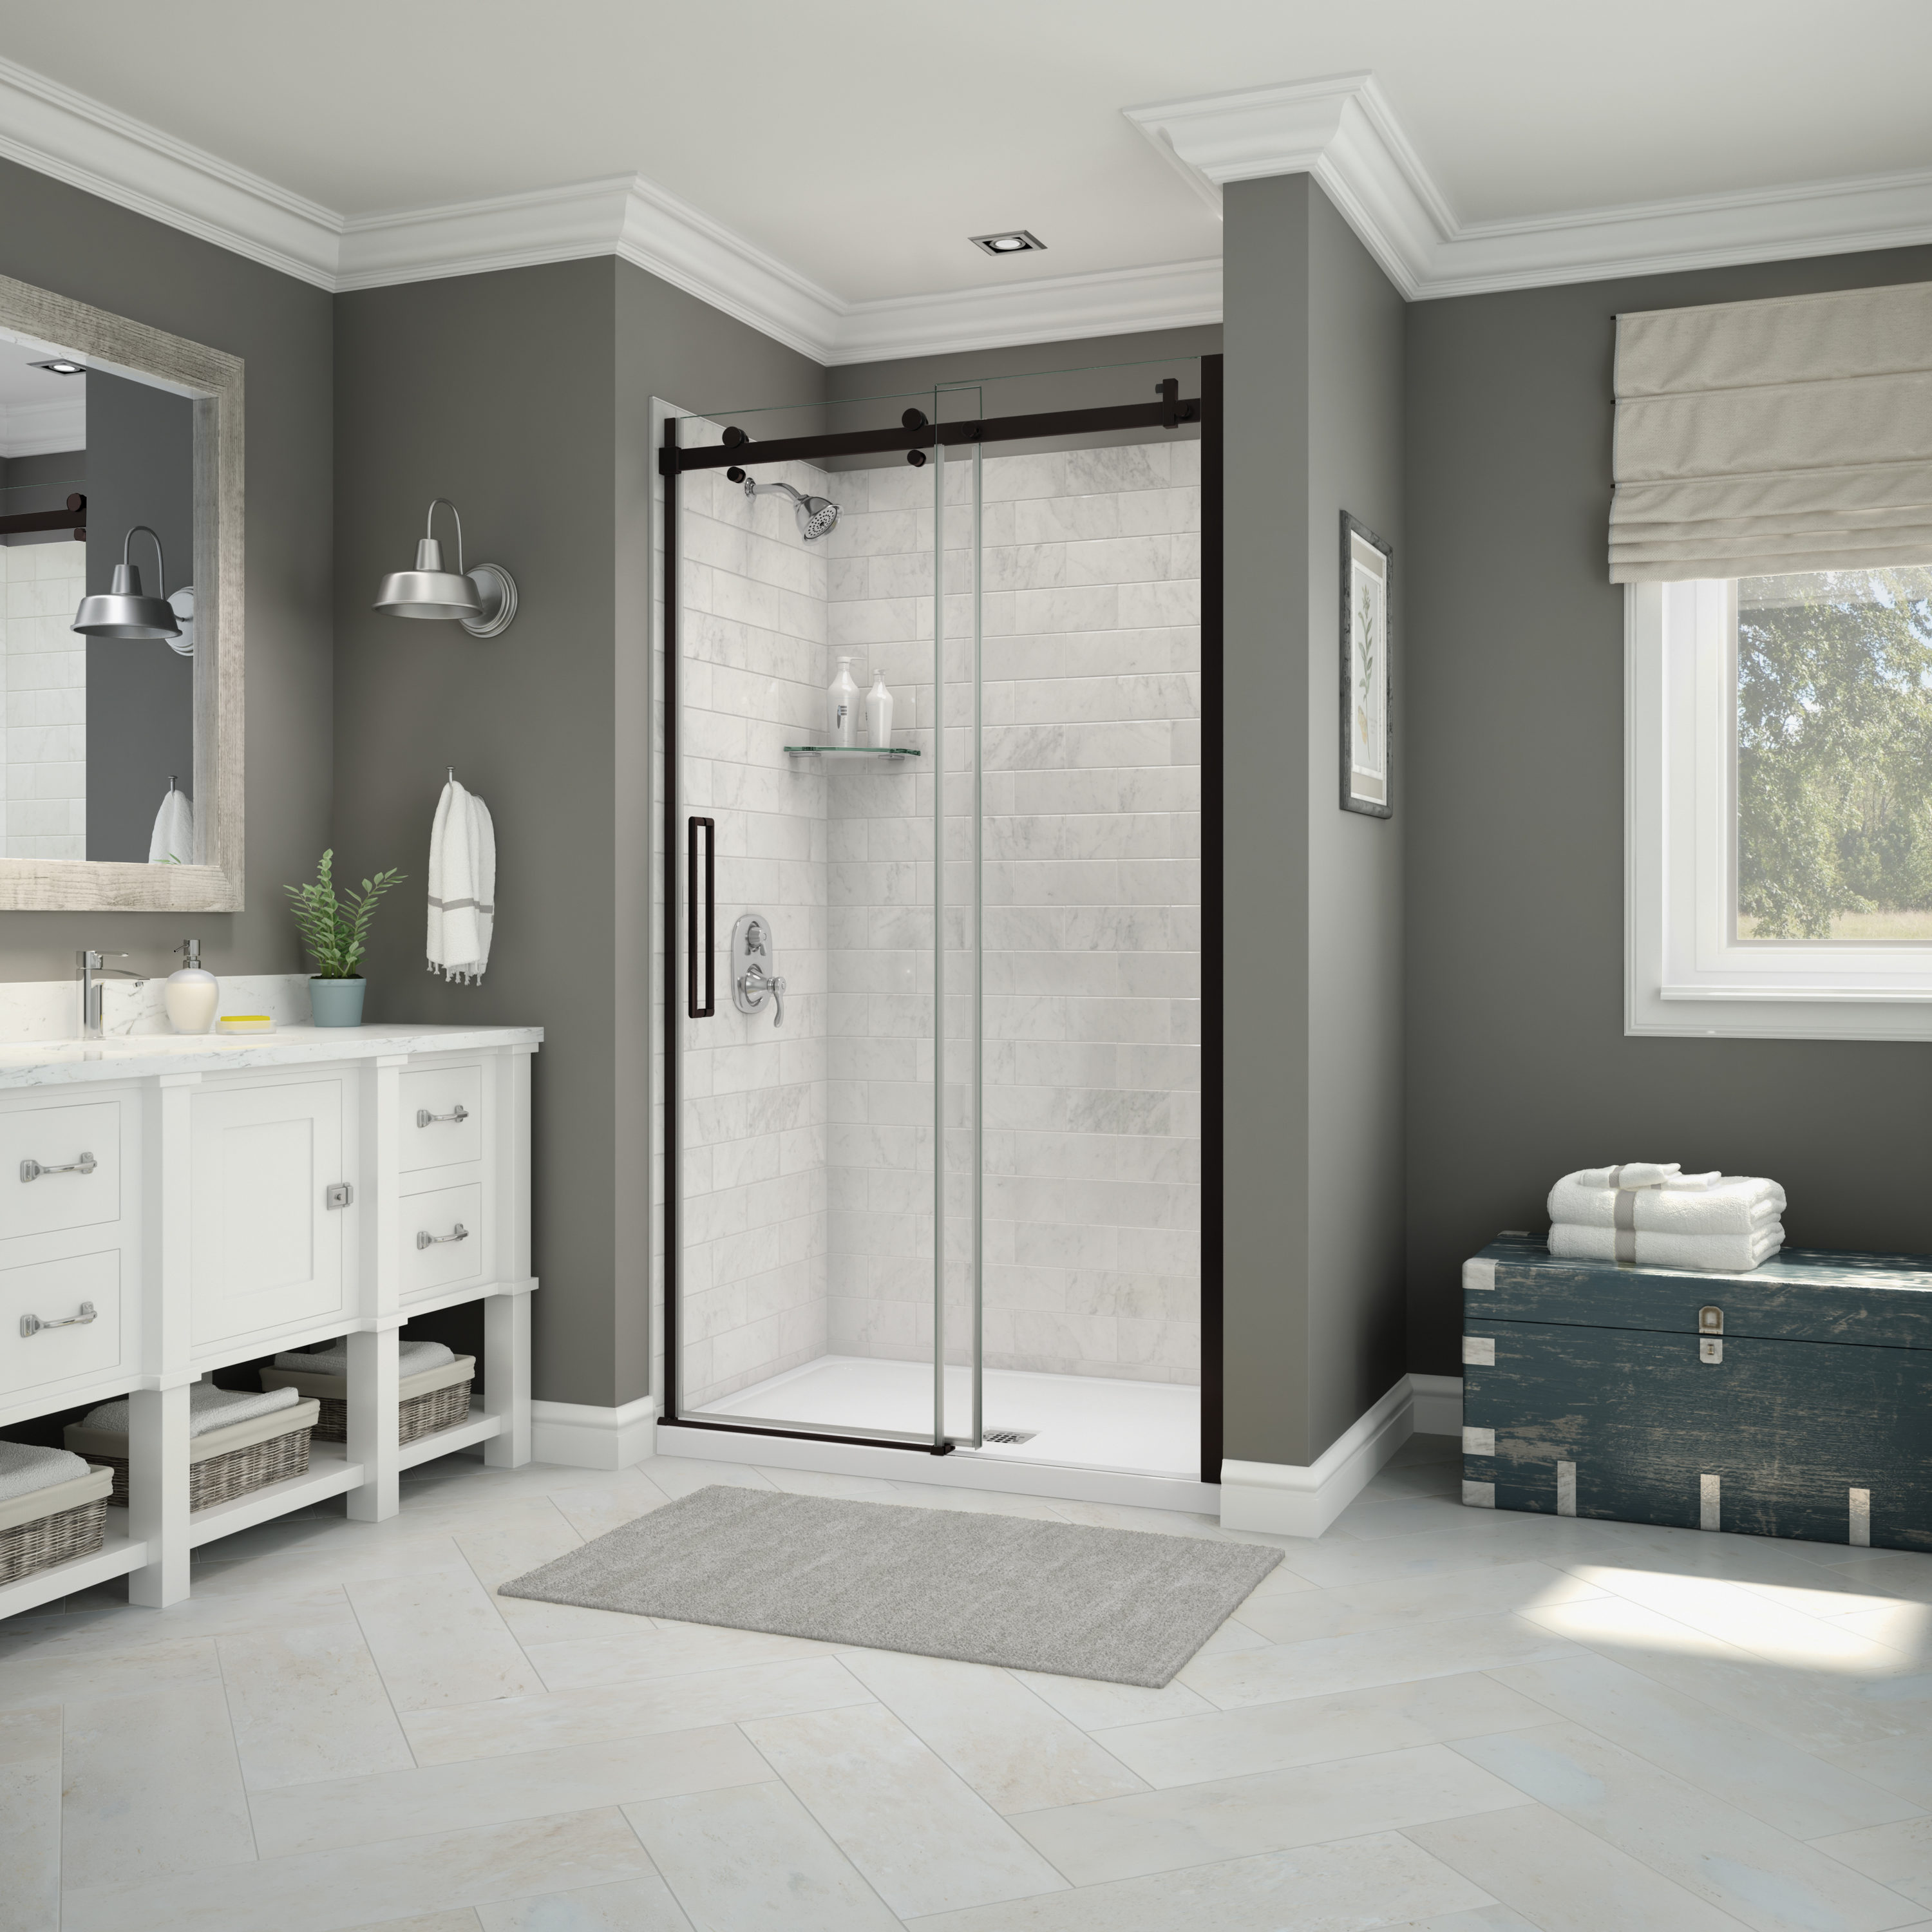 Maax Utile Metro 36 in. W x 80 in. H Direct-to-Stud Fiberglass Shower Wall Set for Corner in Thunder Grey, 2 Panels